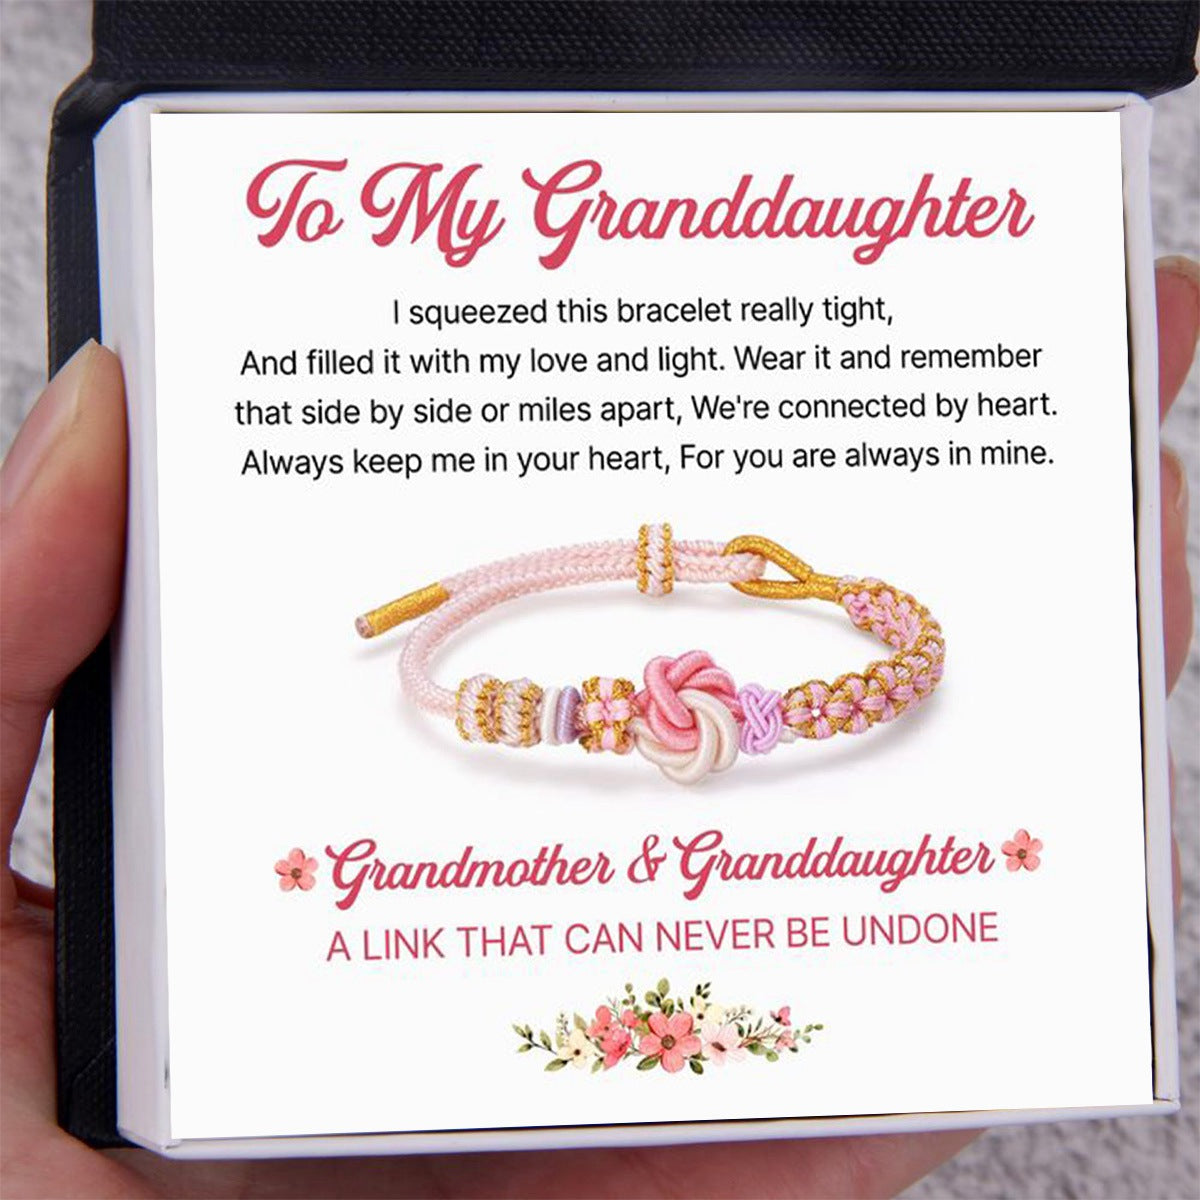 Grandmother & Granddaughter “A Link That Can Never Be Undone” Peach Blossom Knot Bracelet